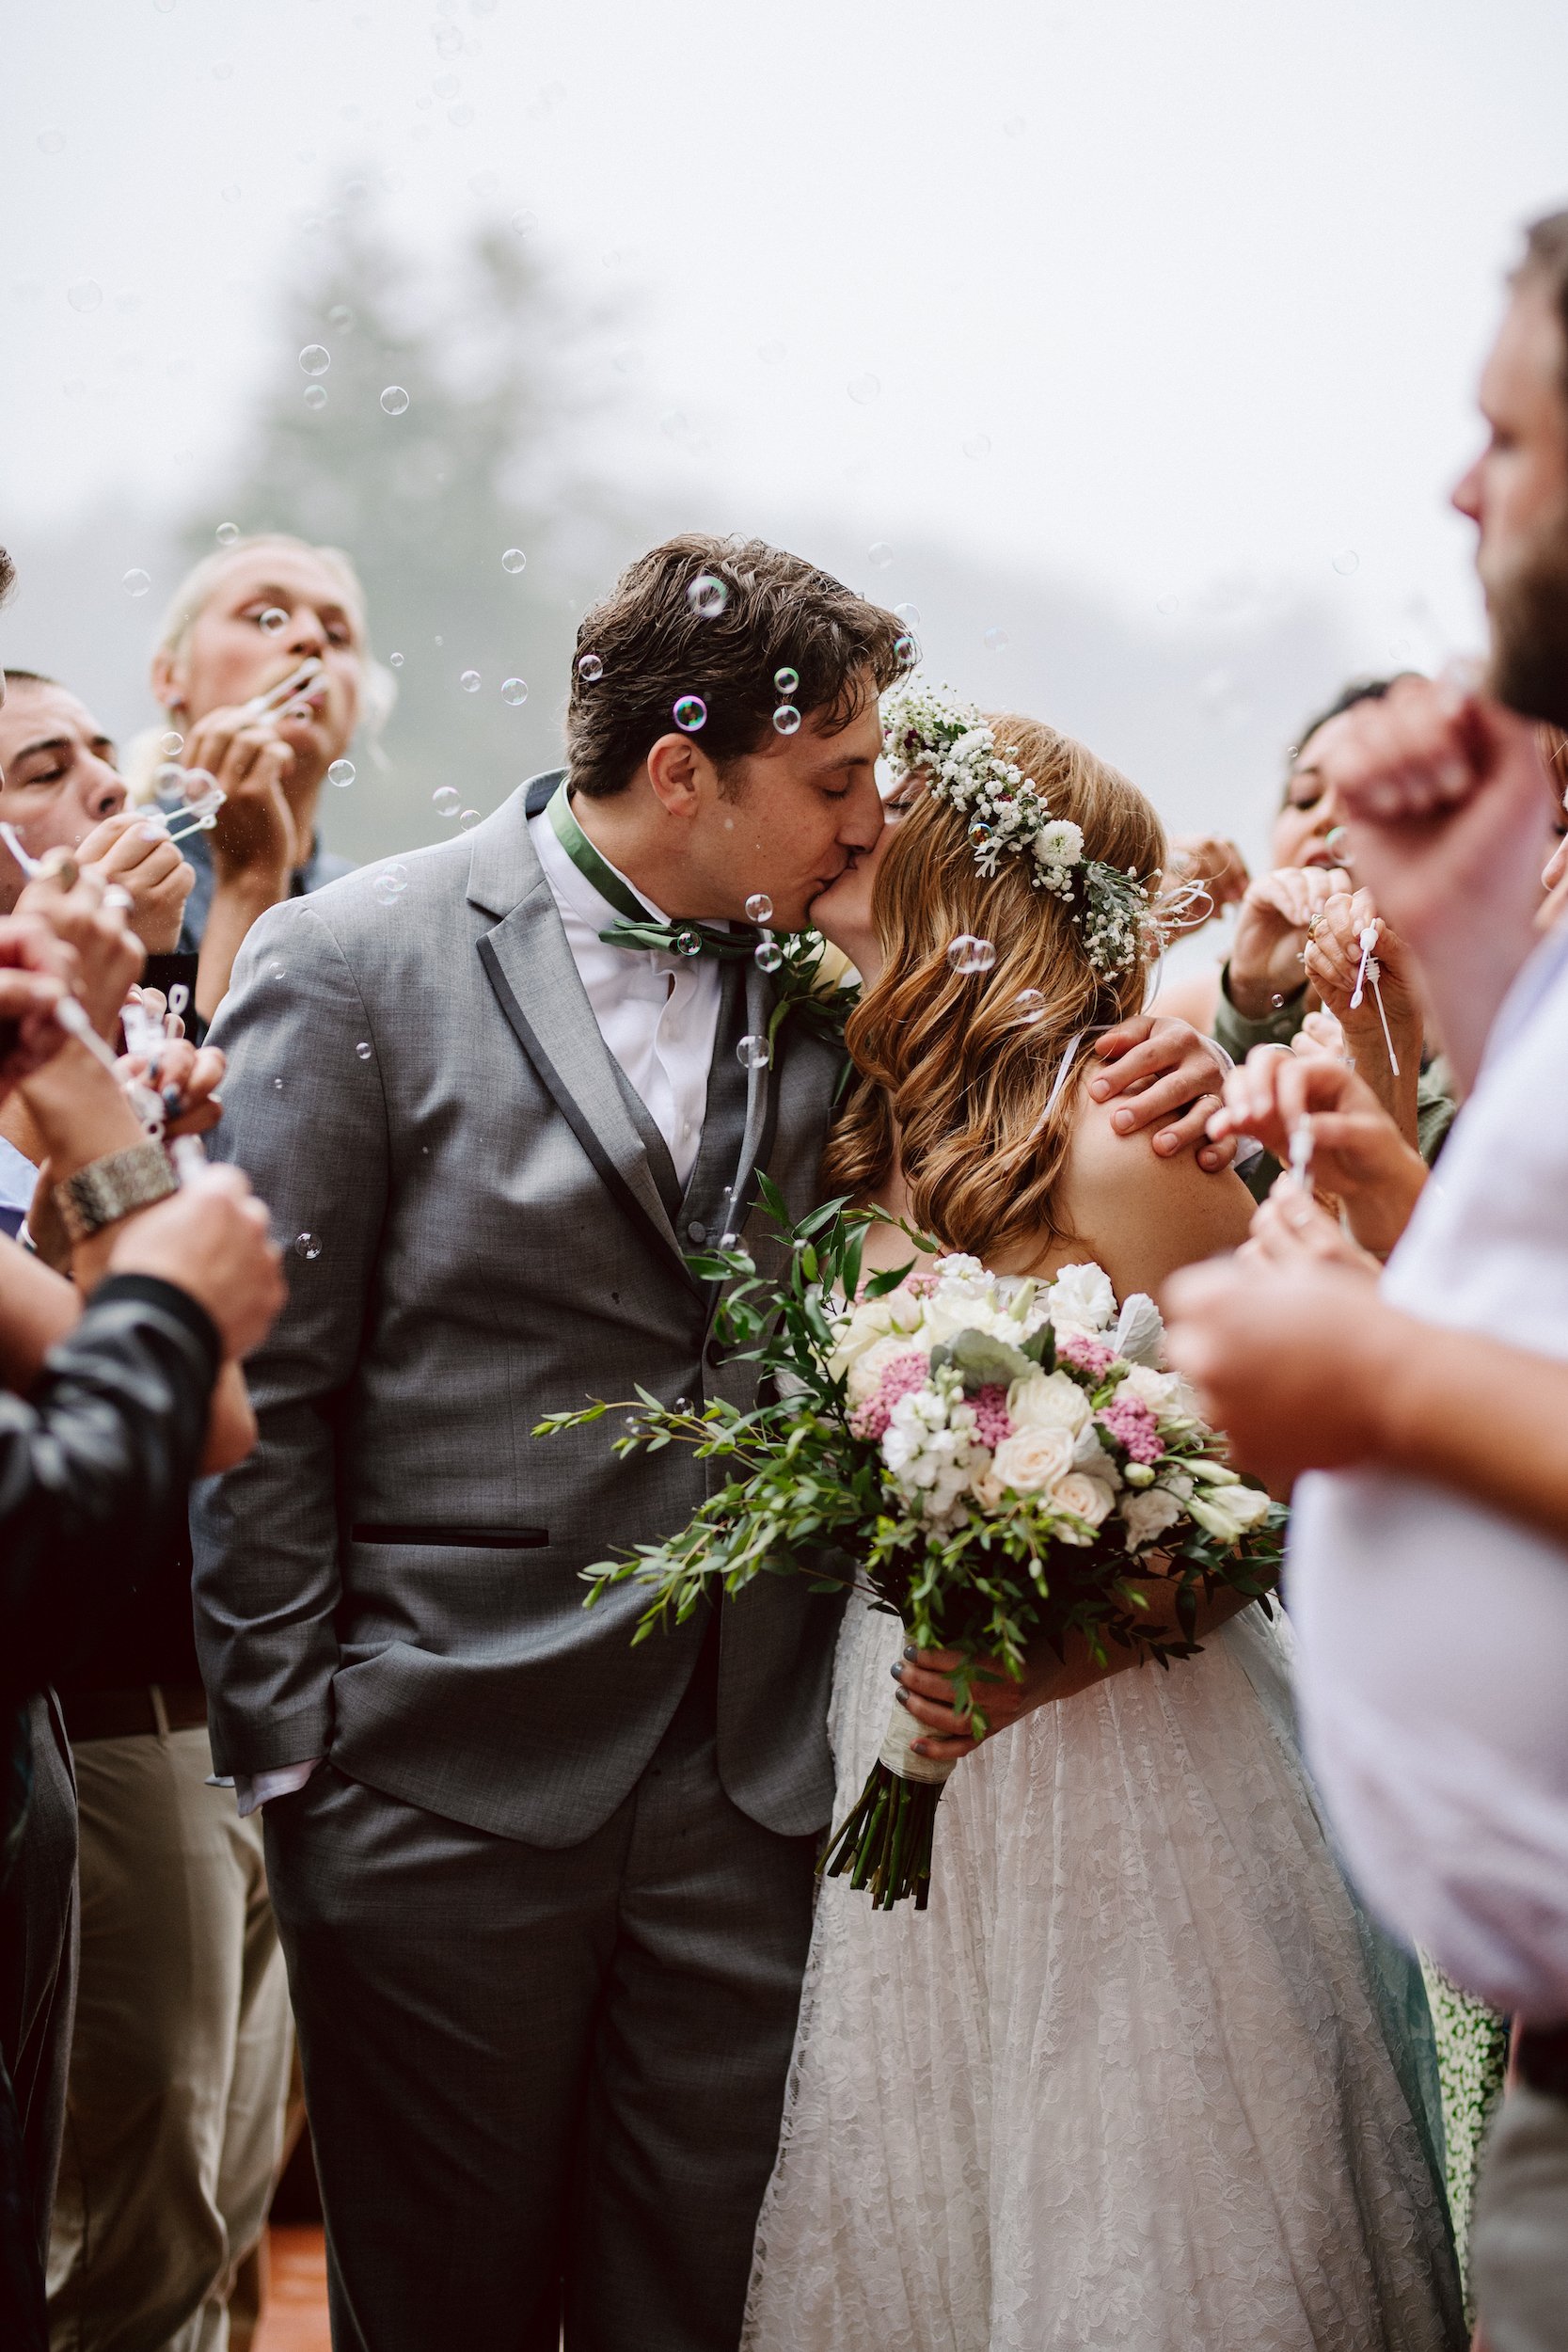 A man and woman in wedding attire kiss while their family gathers around them, blowing bubbles in celebration.